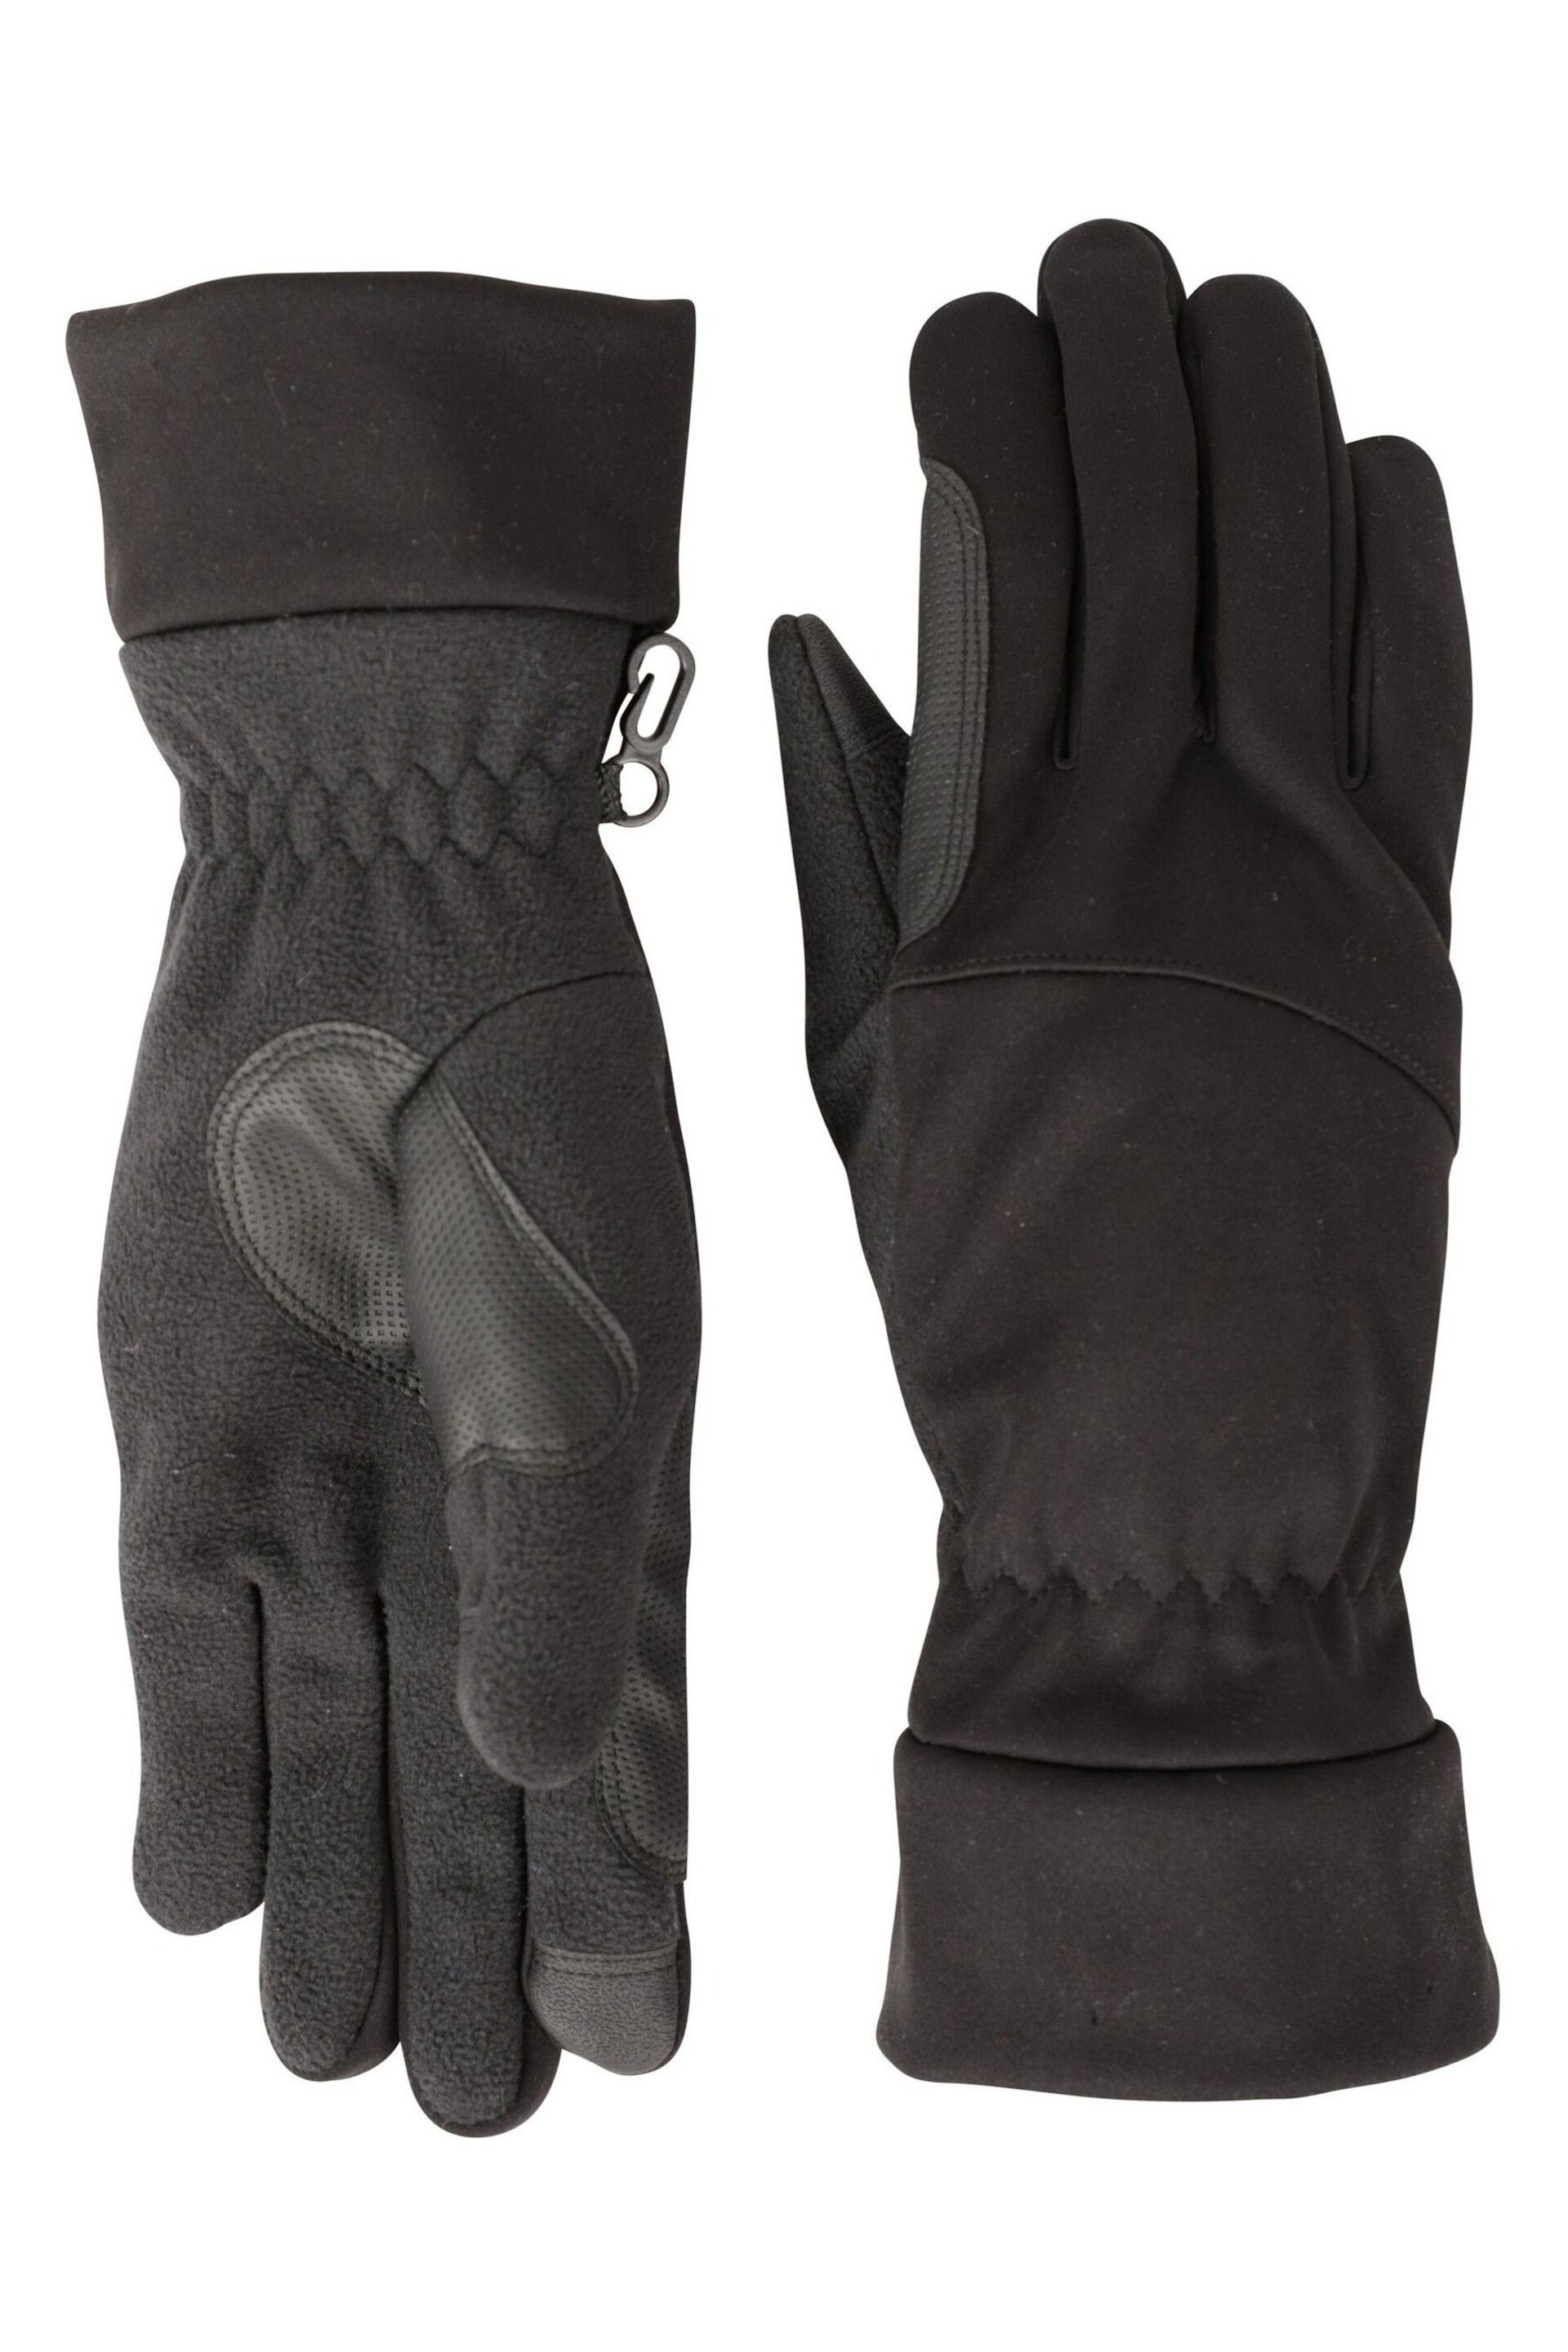 Mountain Warehouse Black Softshell Touchscreen Mens Gloves - Image 1 of 5